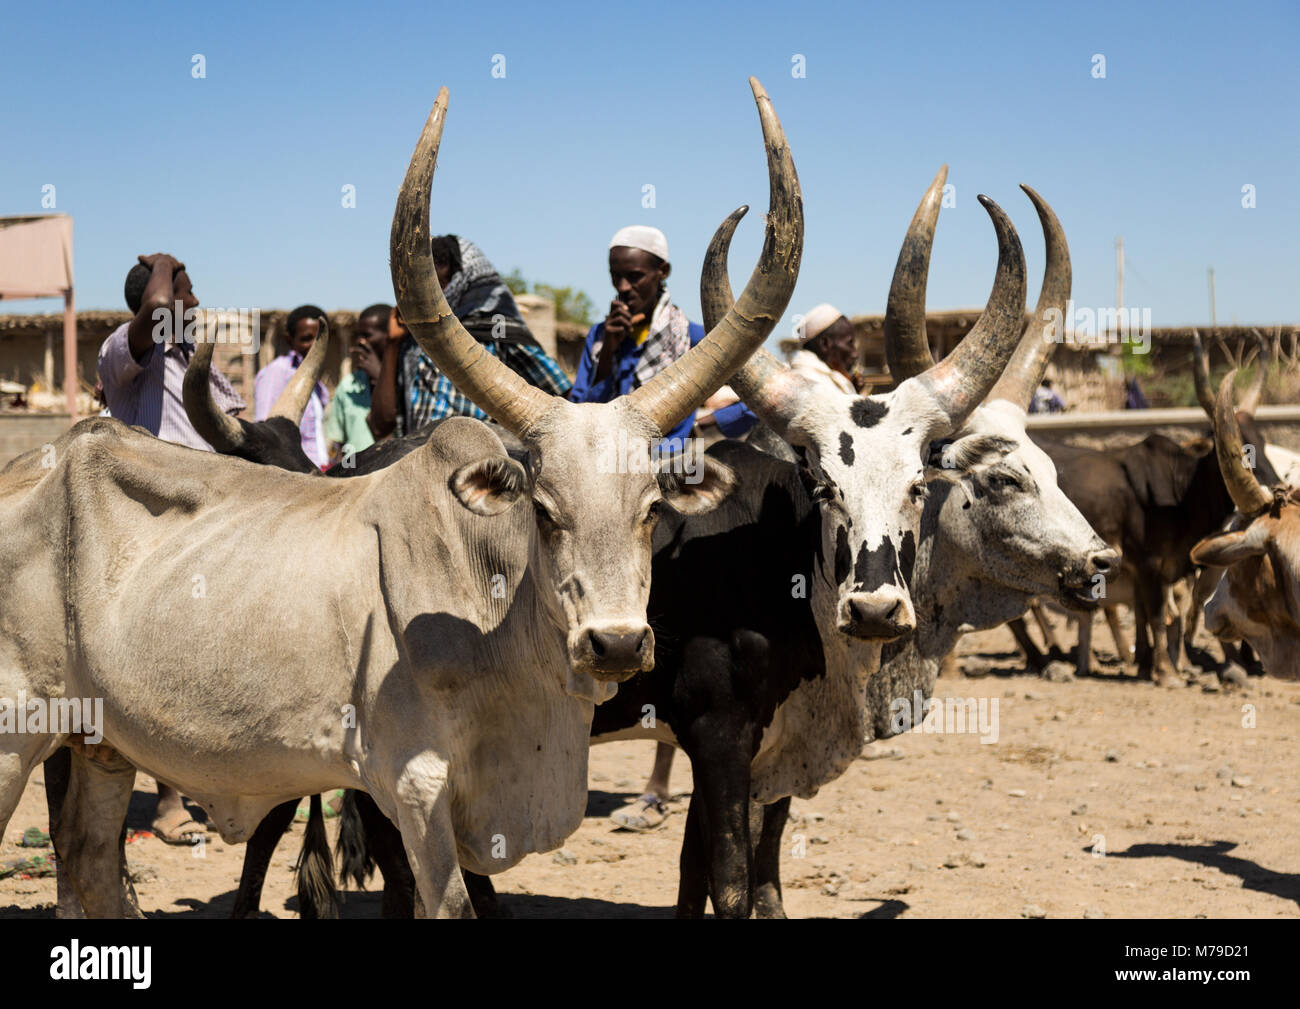 Cows with long horns sold at the market, Afar region, Assayta, Ethiopia Stock Photo